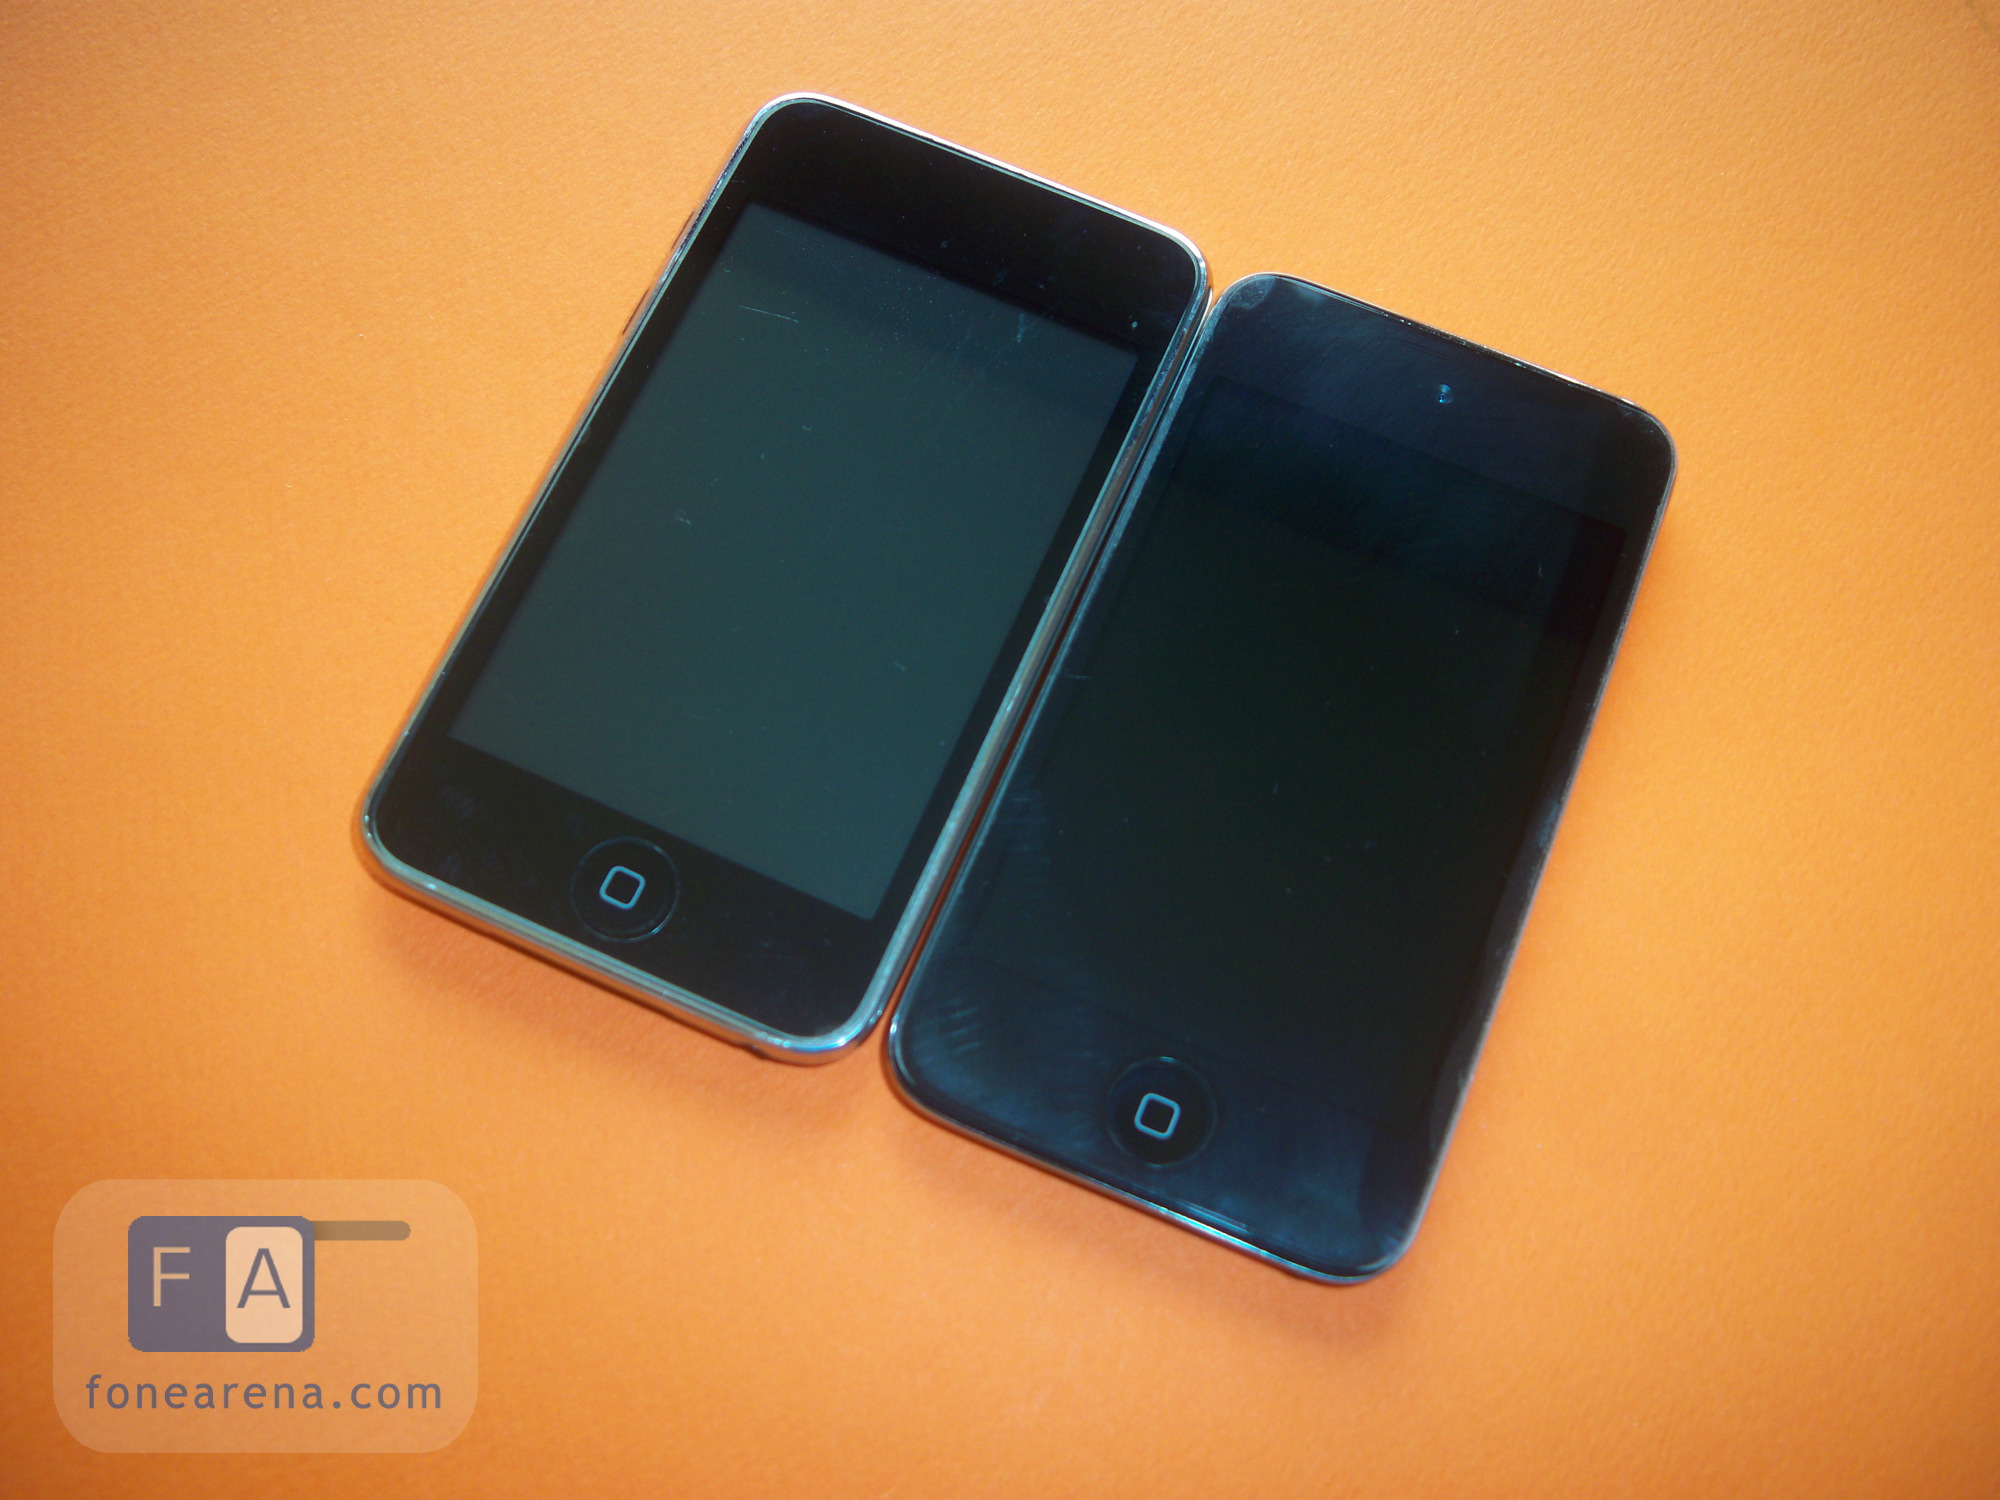 ipod touch 3 generation